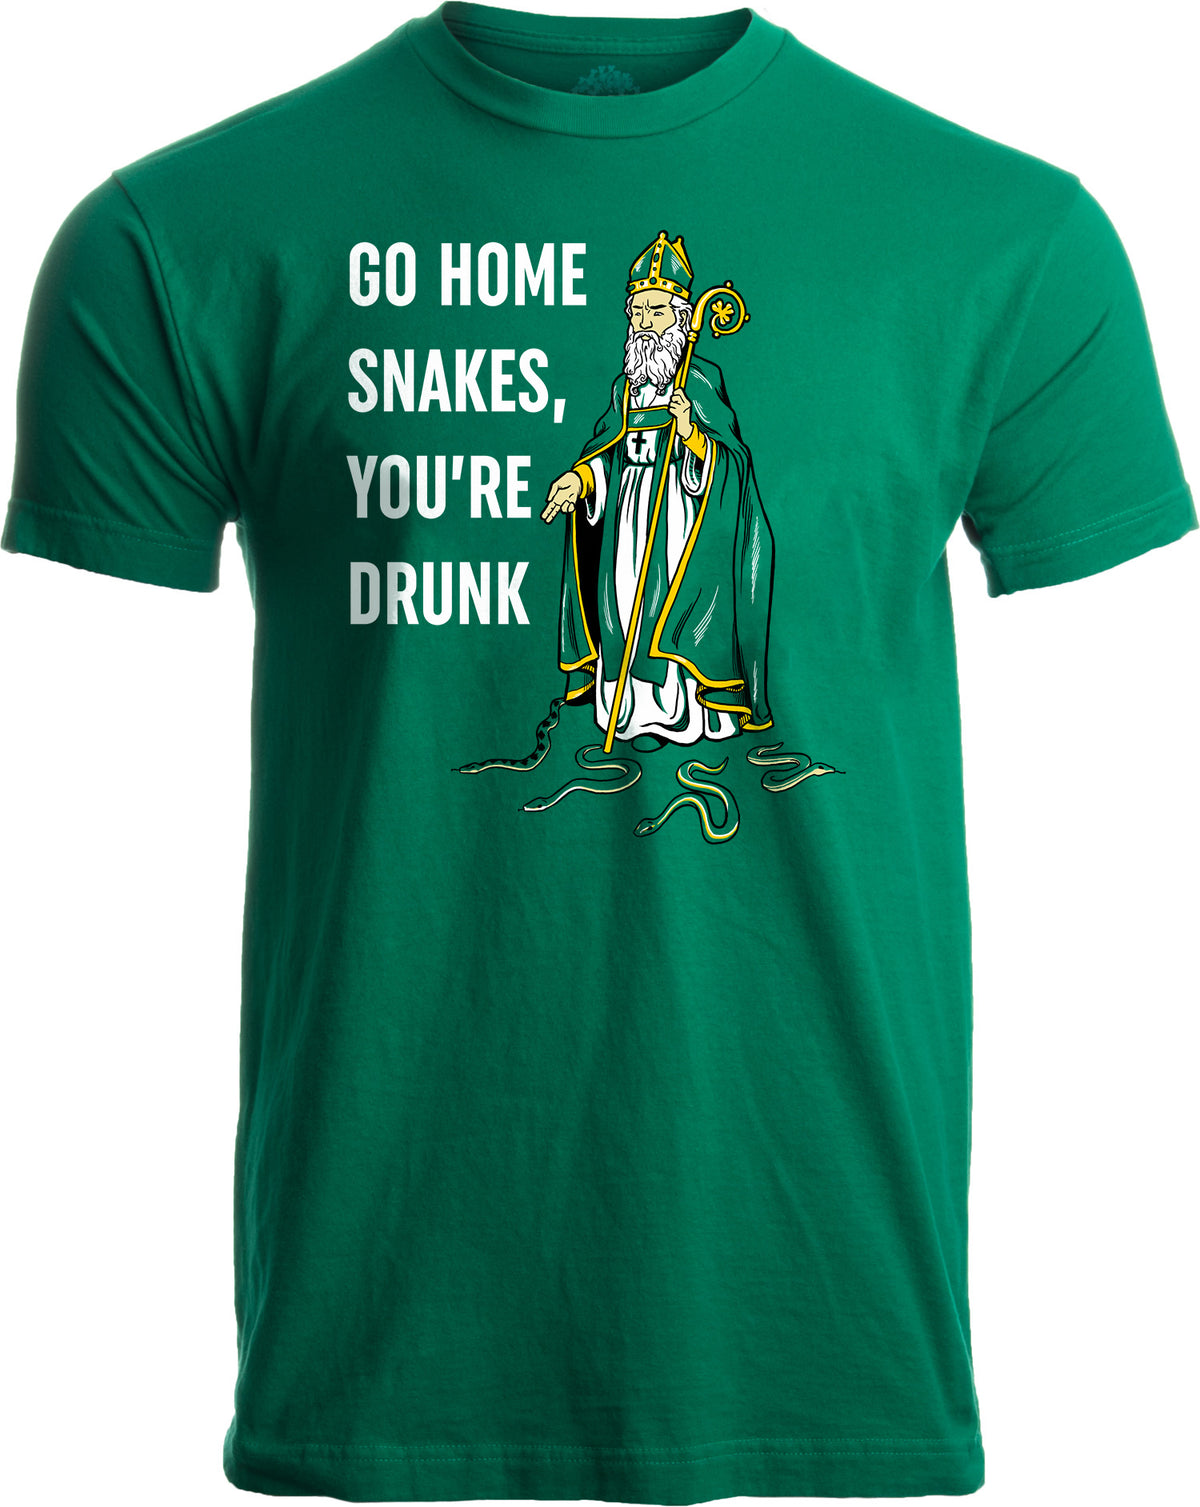 Go Home Snakes, You're Drunk | Funny St. Patrick Paddy's Day Irish Pride T-shirt